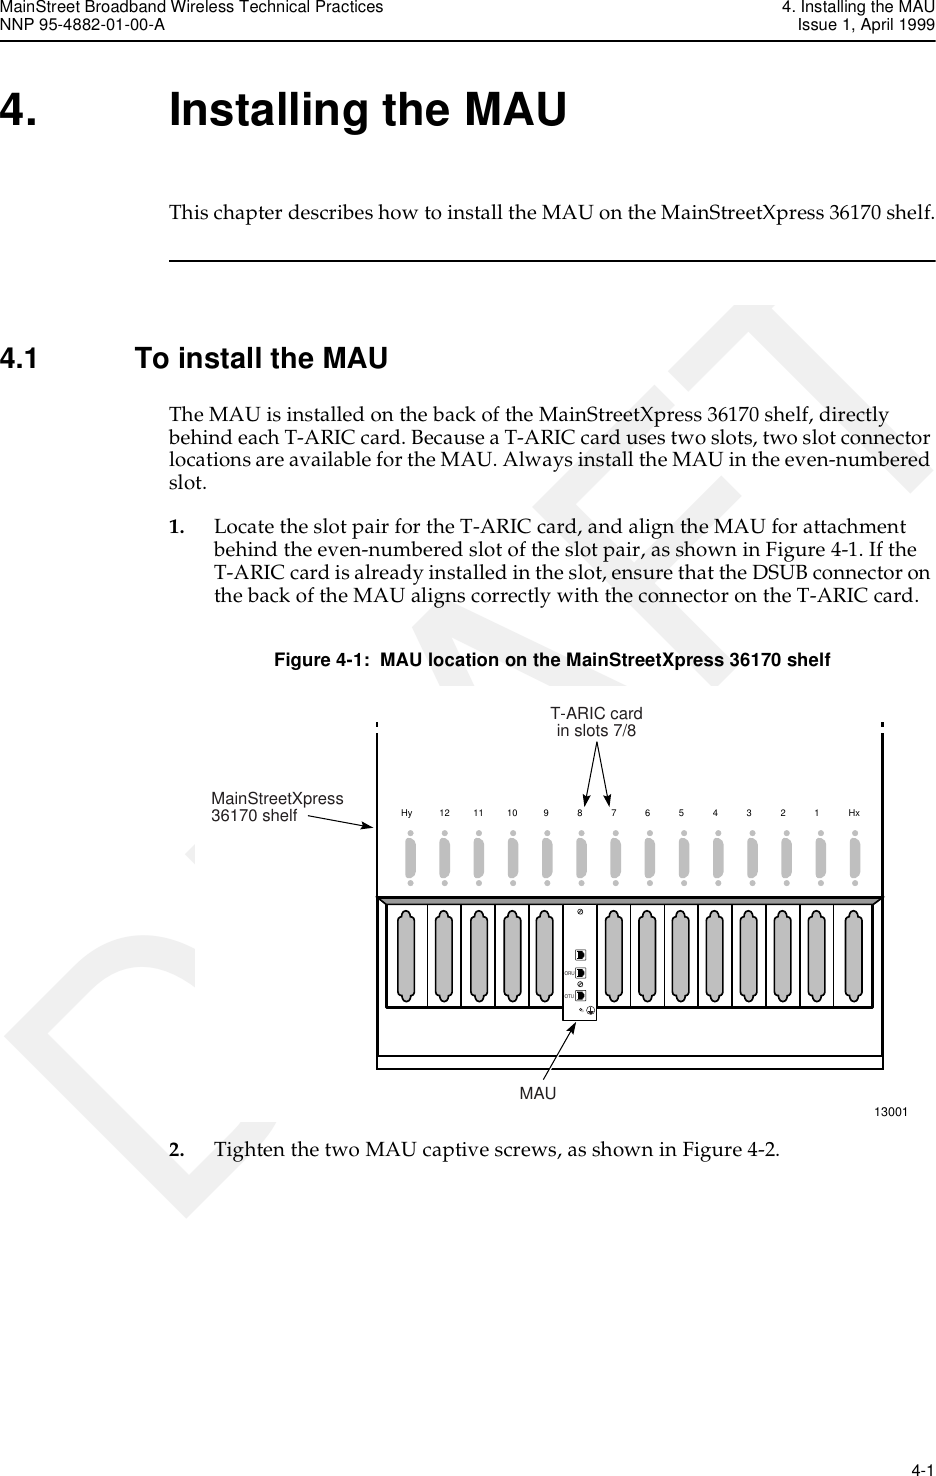 MainStreet Broadband Wireless Technical Practices 4. Installing the MAUNNP 95-4882-01-00-A Issue 1, April 1999   4-1DRAFT4. Installing the MAUThis chapter describes how to install the MAU on the MainStreetXpress 36170 shelf.4.1 To install the MAUThe MAU is installed on the back of the MainStreetXpress 36170 shelf, directly behind each T-ARIC card. Because a T-ARIC card uses two slots, two slot connector locations are available for the MAU. Always install the MAU in the even-numbered slot.1. Locate the slot pair for the T-ARIC card, and align the MAU for attachment behind the even-numbered slot of the slot pair, as shown in Figure 4-1. If the T-ARIC card is already installed in the slot, ensure that the DSUB connector on the back of the MAU aligns correctly with the connector on the T-ARIC card.Figure 4-1:  MAU location on the MainStreetXpress 36170 shelf2. Tighten the two MAU captive screws, as shown in Figure 4-2. 13001Hy121110987654321HxORUOTUORUOTUMAUMainStreetXpress36170 shelfT-ARIC cardin slots 7/8